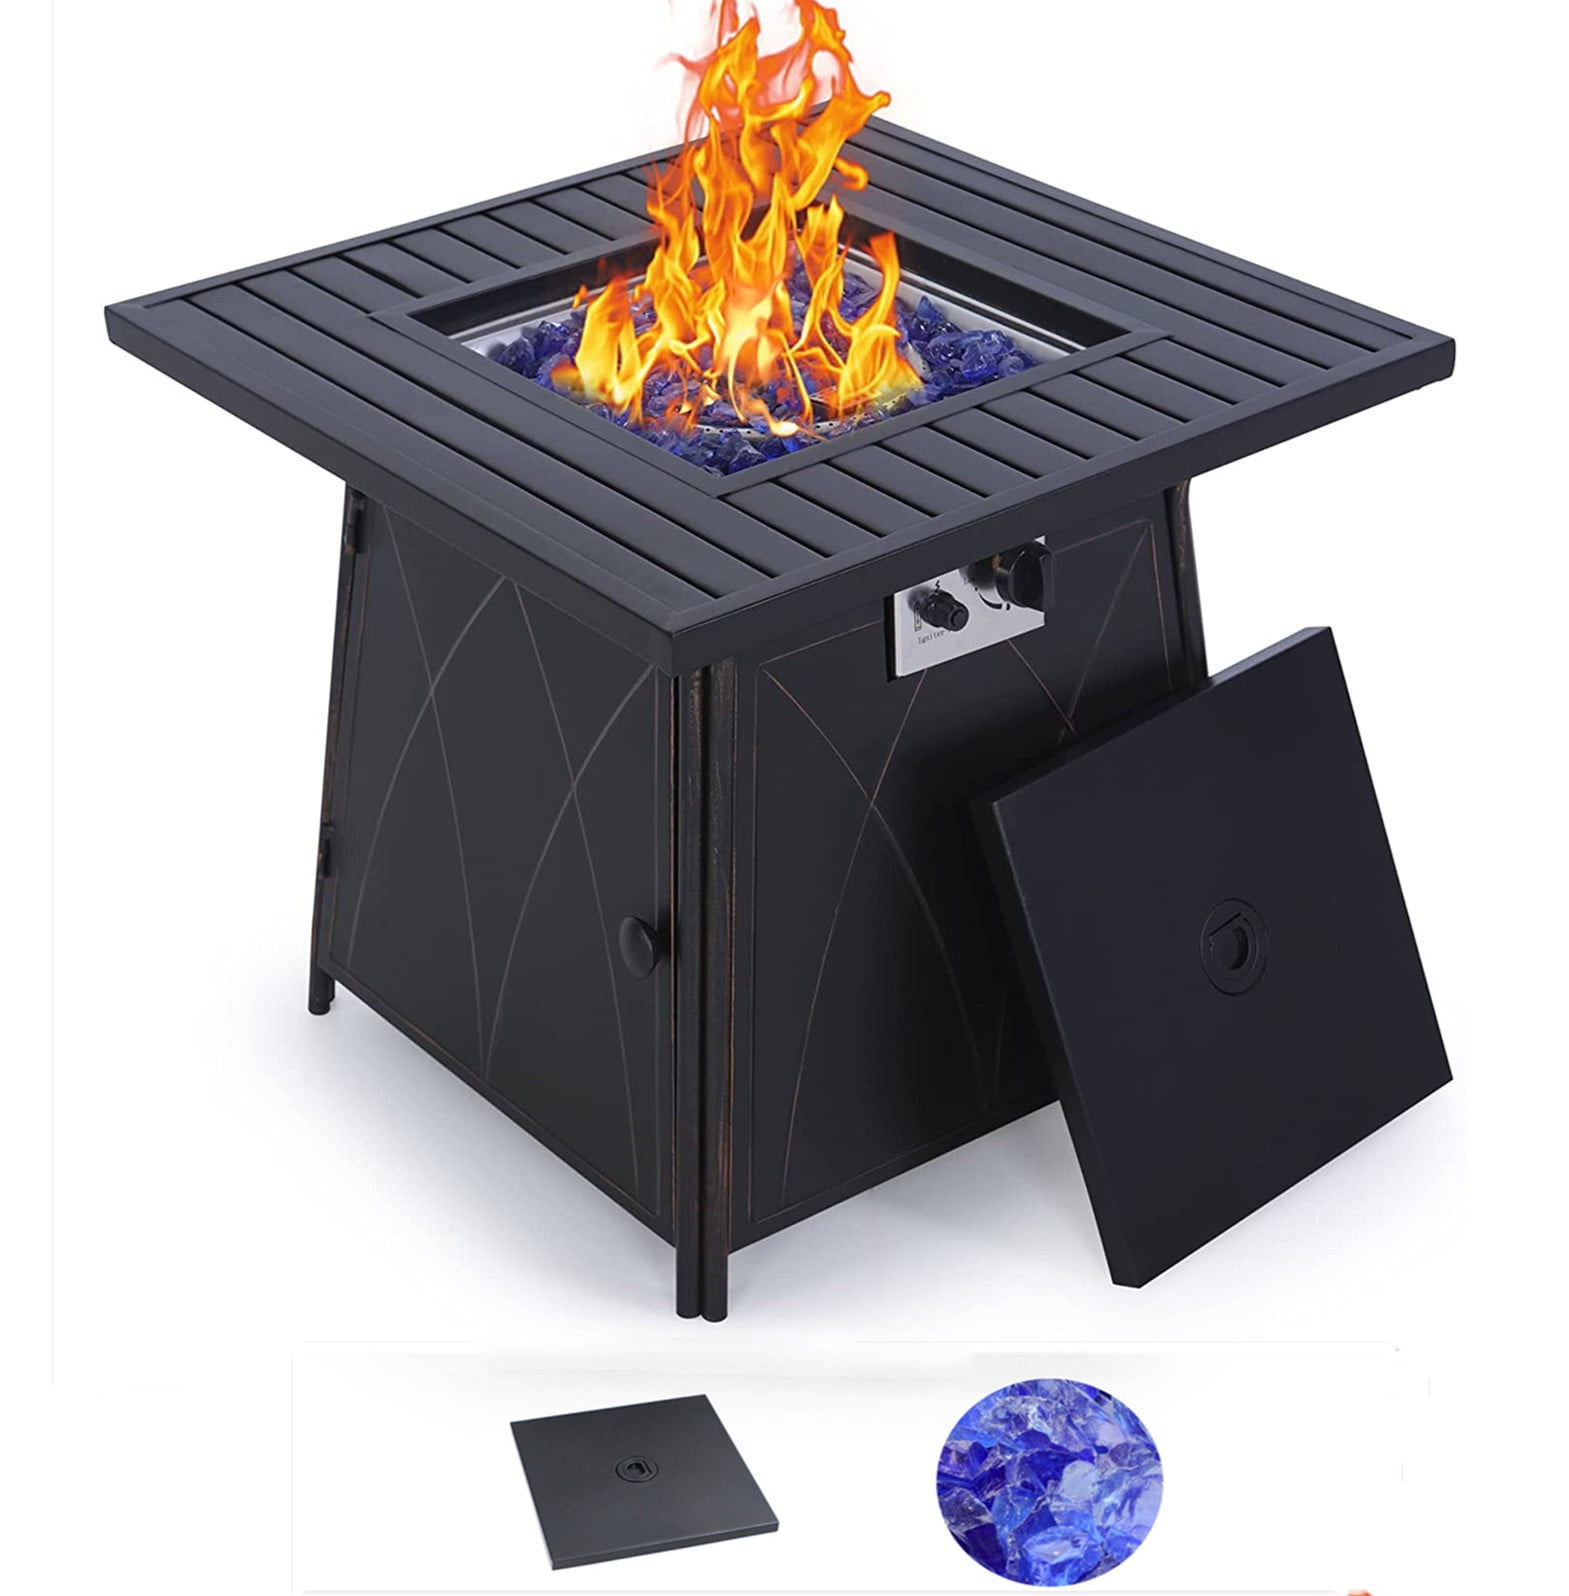 Mf Studio Gas Fire Pit Table 28 Inch, How Much Fire Pit Glass Do I Need